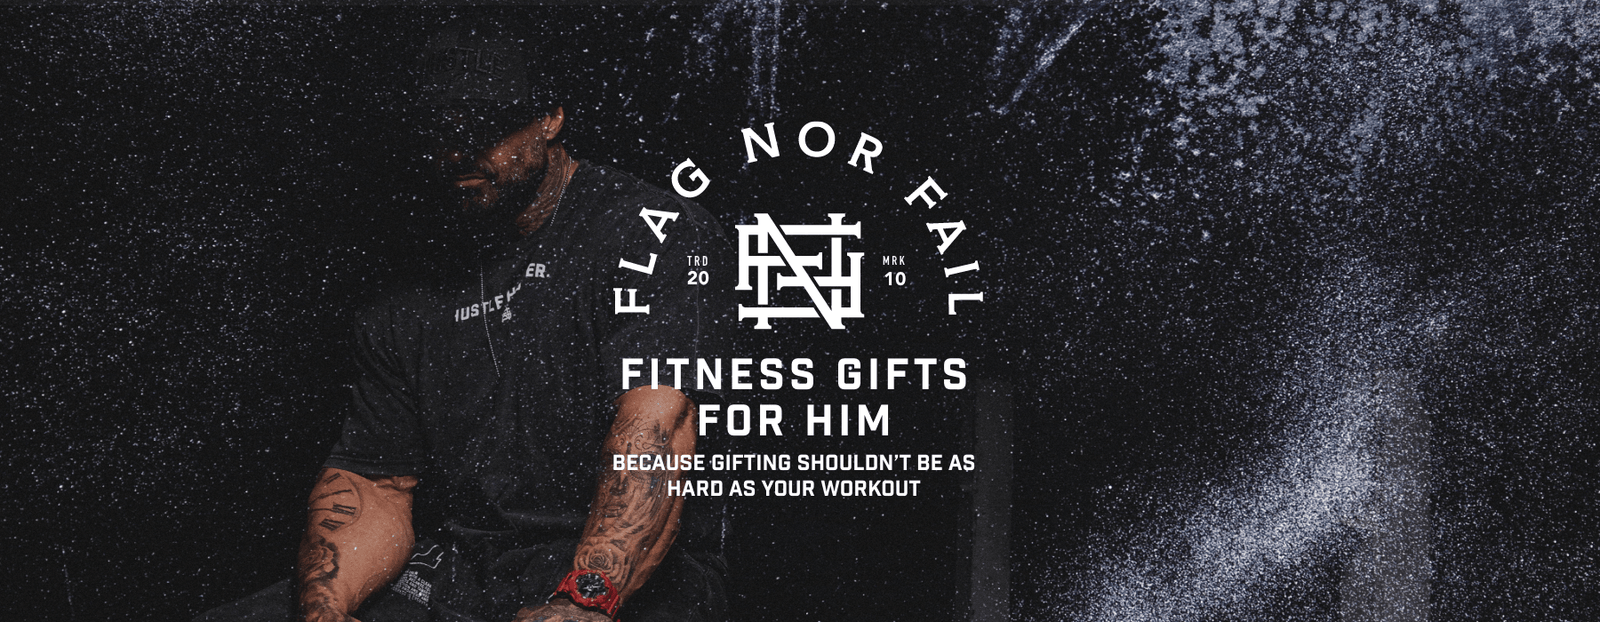 FITNESS GIFT GUIDE FOR HIM - FLAG NOR FAIL